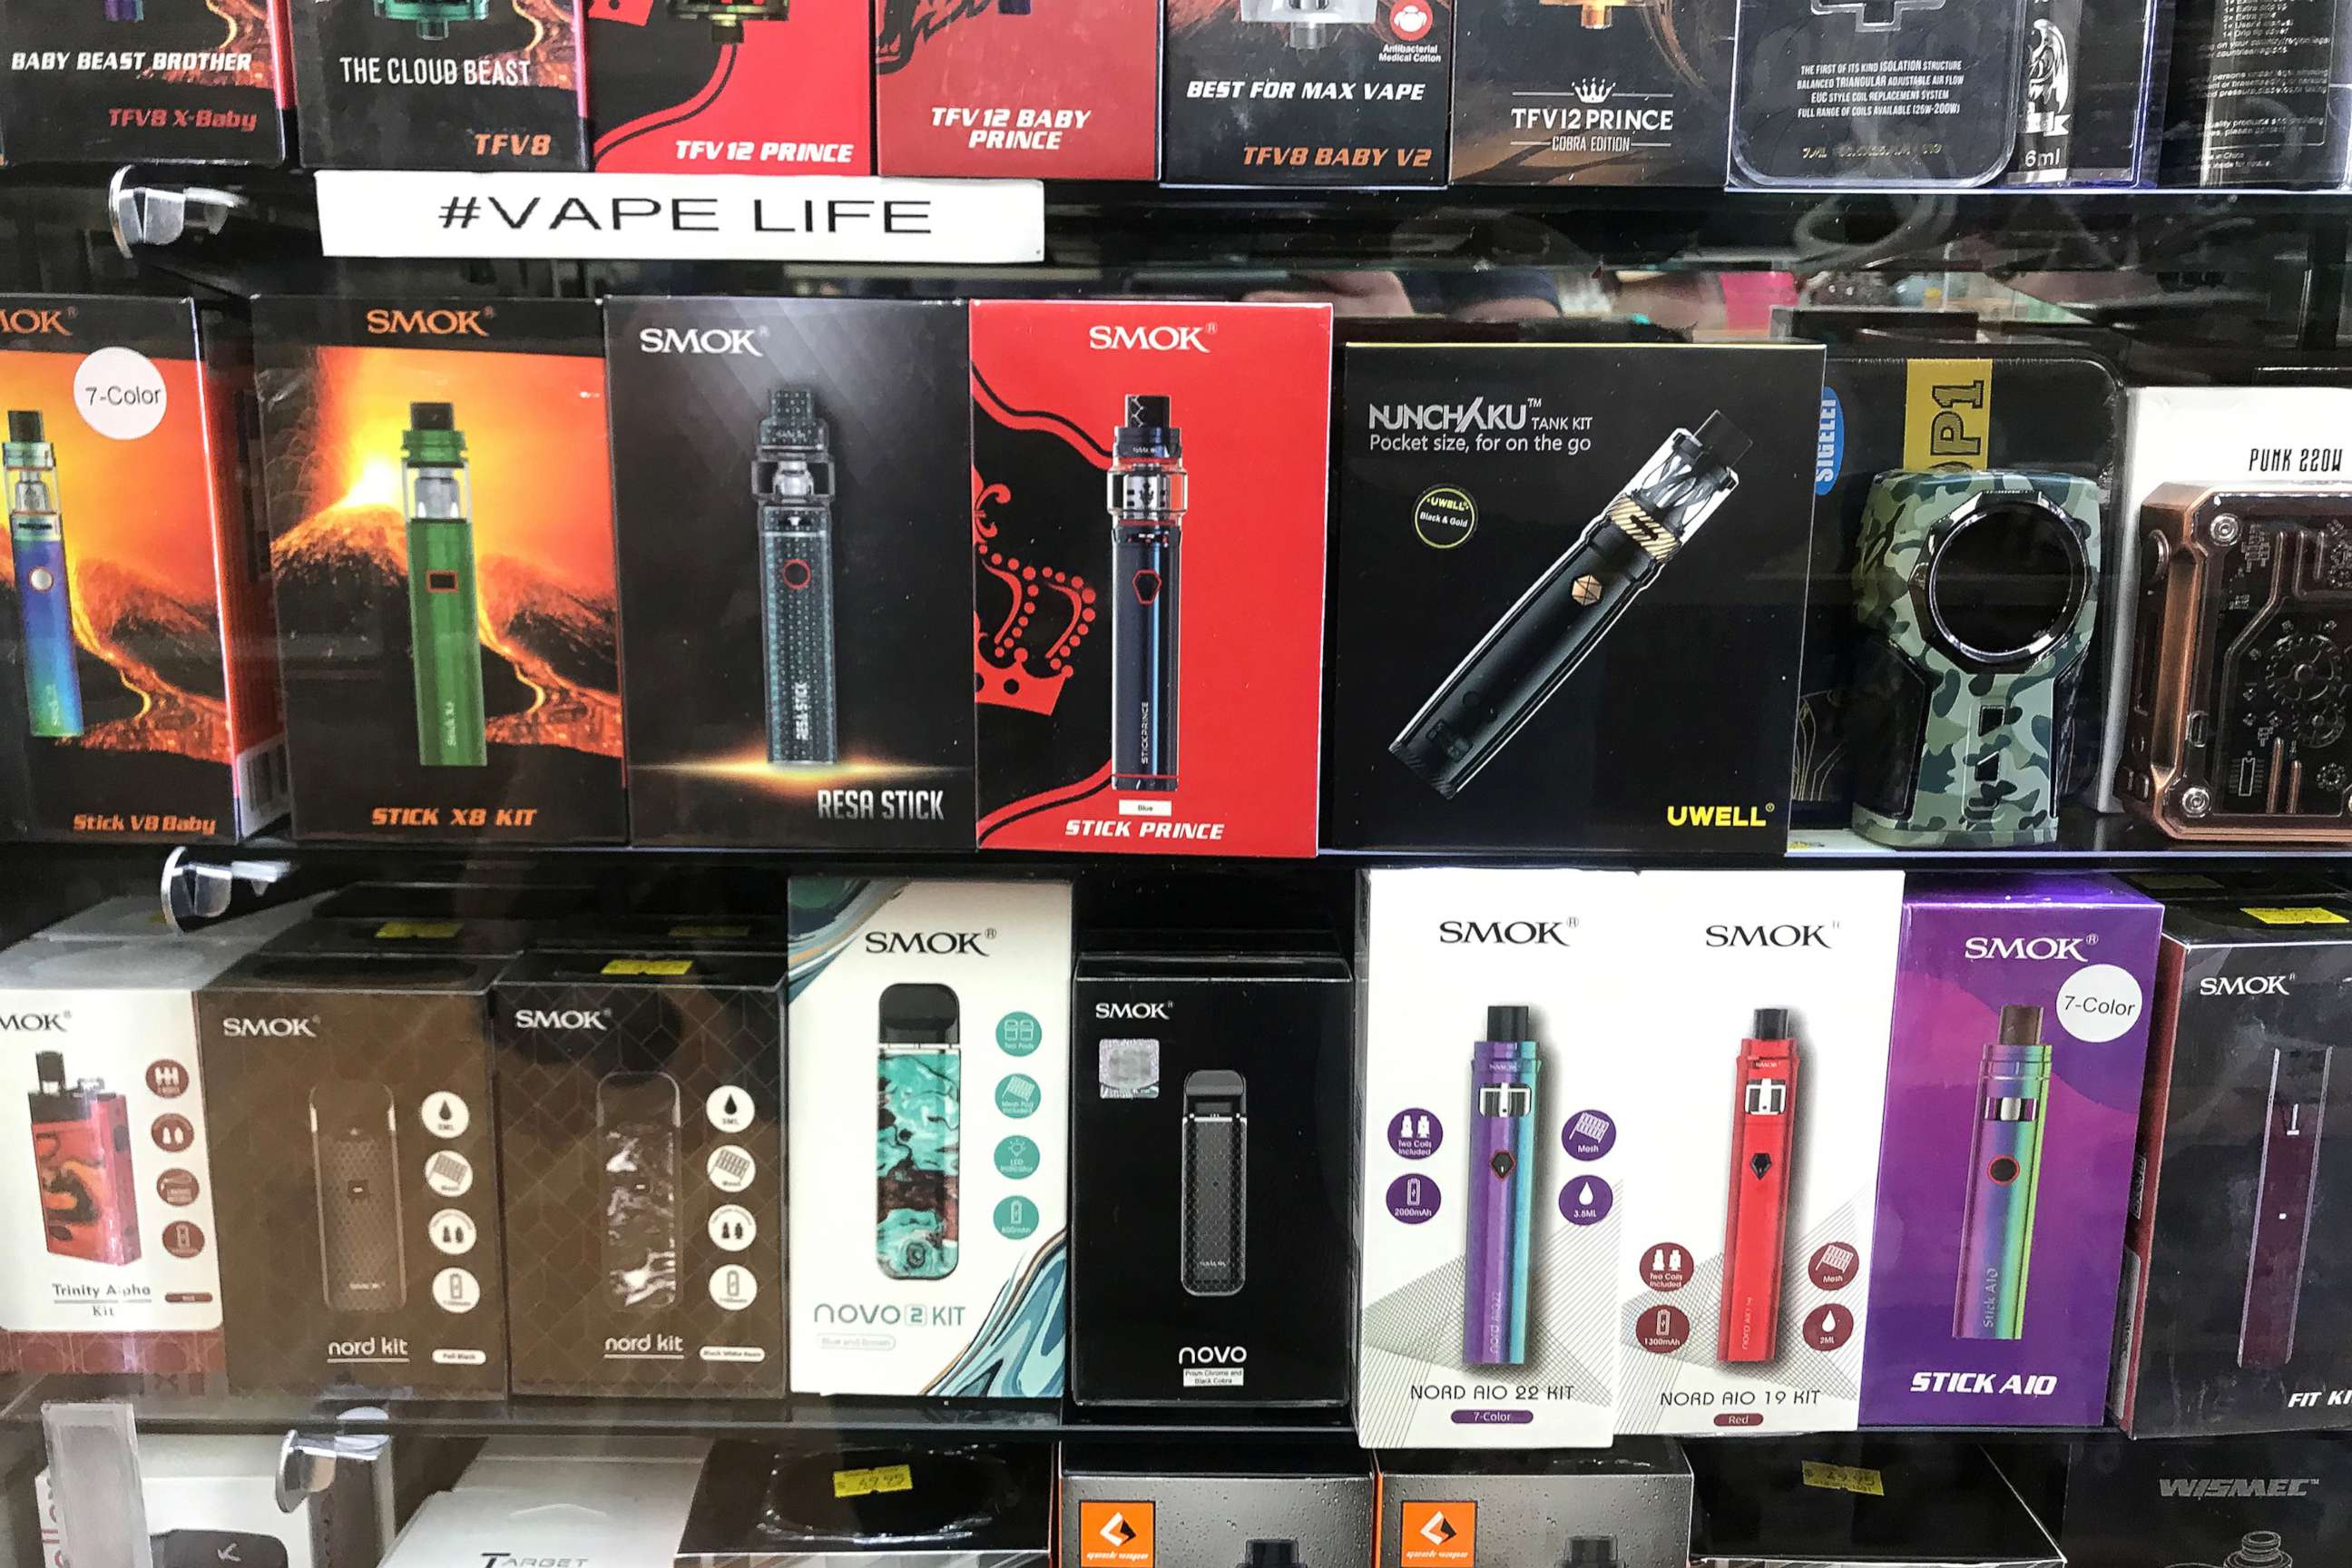 PHOTO: Vaping products are on display in a window at a store in New York, September 17, 2019.